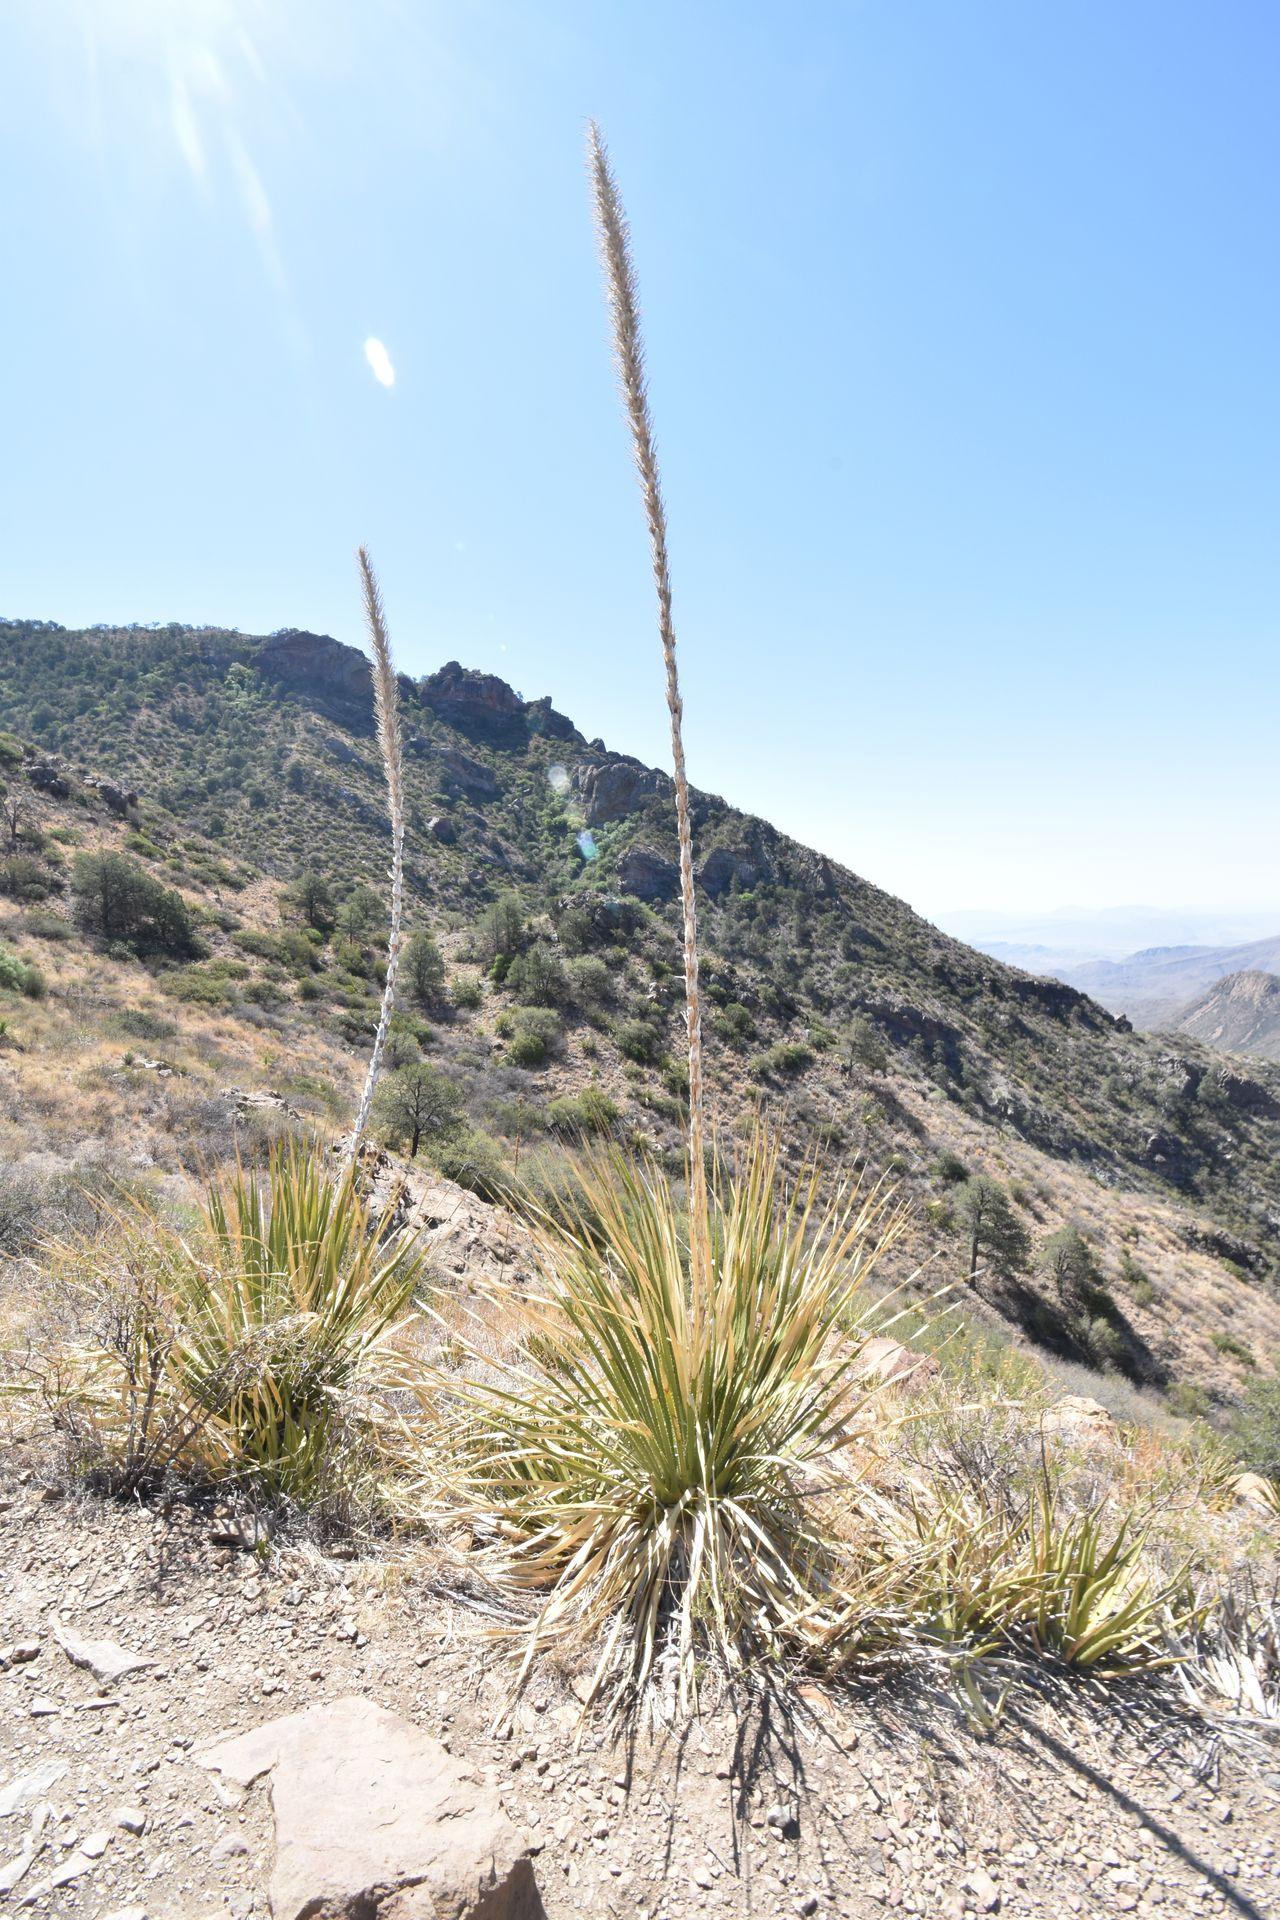 Some desert plants along the Lost Mine Trail.